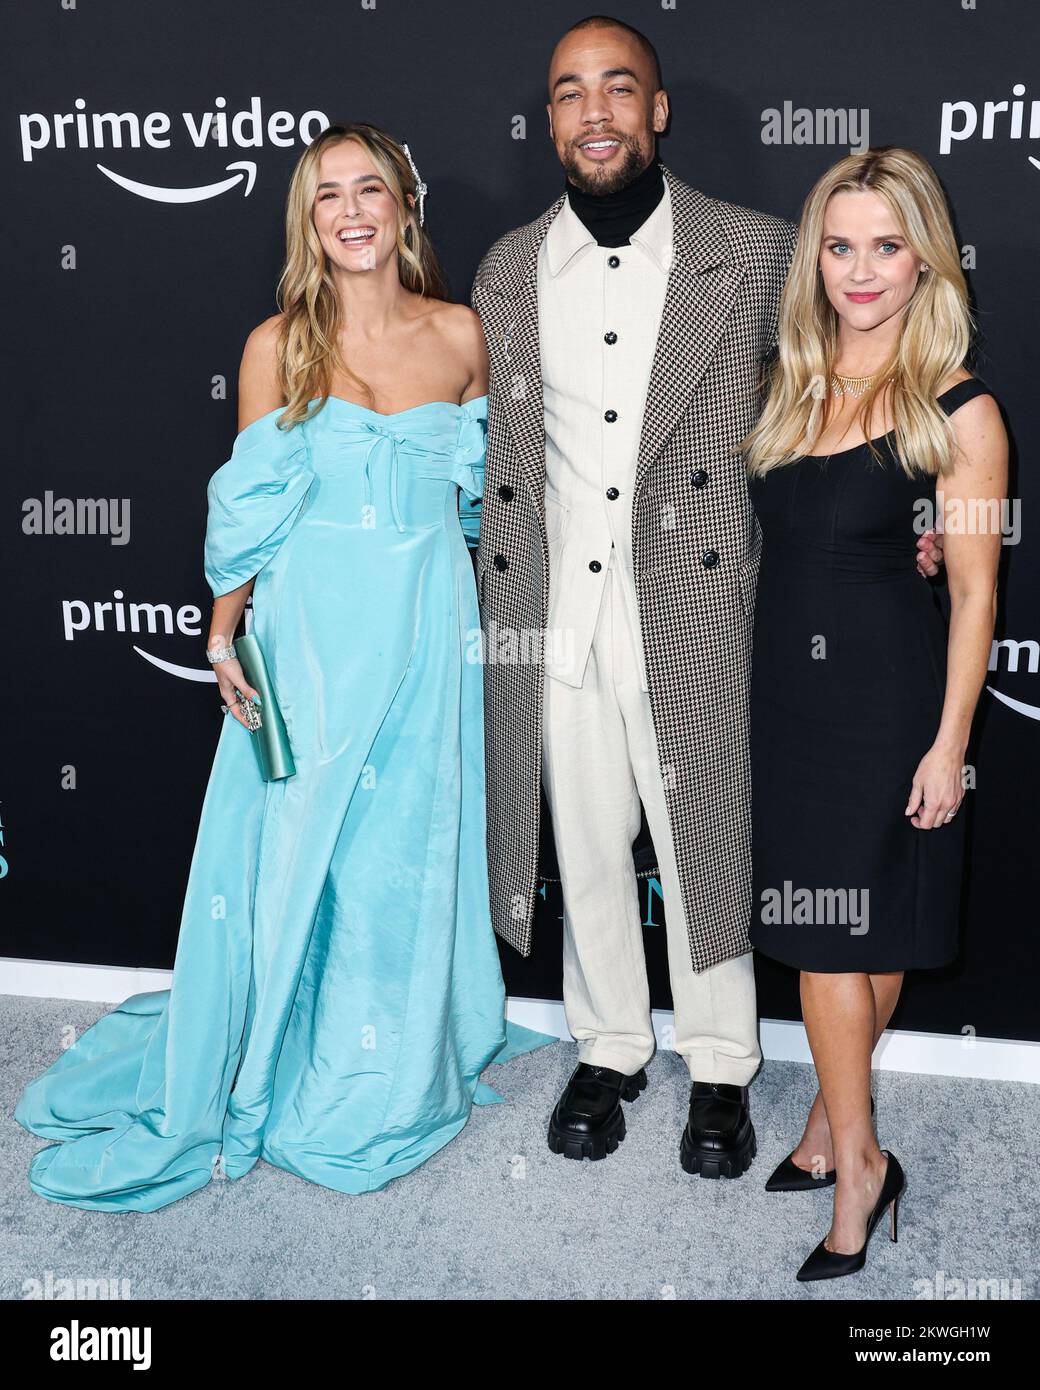 CENTURY CITY, LOS ANGELES, CALIFORNIA, USA - NOVEMBER 29: Zoey Deutch, Kendrick Sampson and Reese Witherspoon arrive at the Los Angeles Premiere Of Amazon Prime Video's 'Something From Tiffany's' held at AMC Century City 15 at Westfield Century City on November 29, 2022 in Century City, Los Angeles, California, United States. (Photo by Xavier Collin/Image Press Agency) Stock Photo